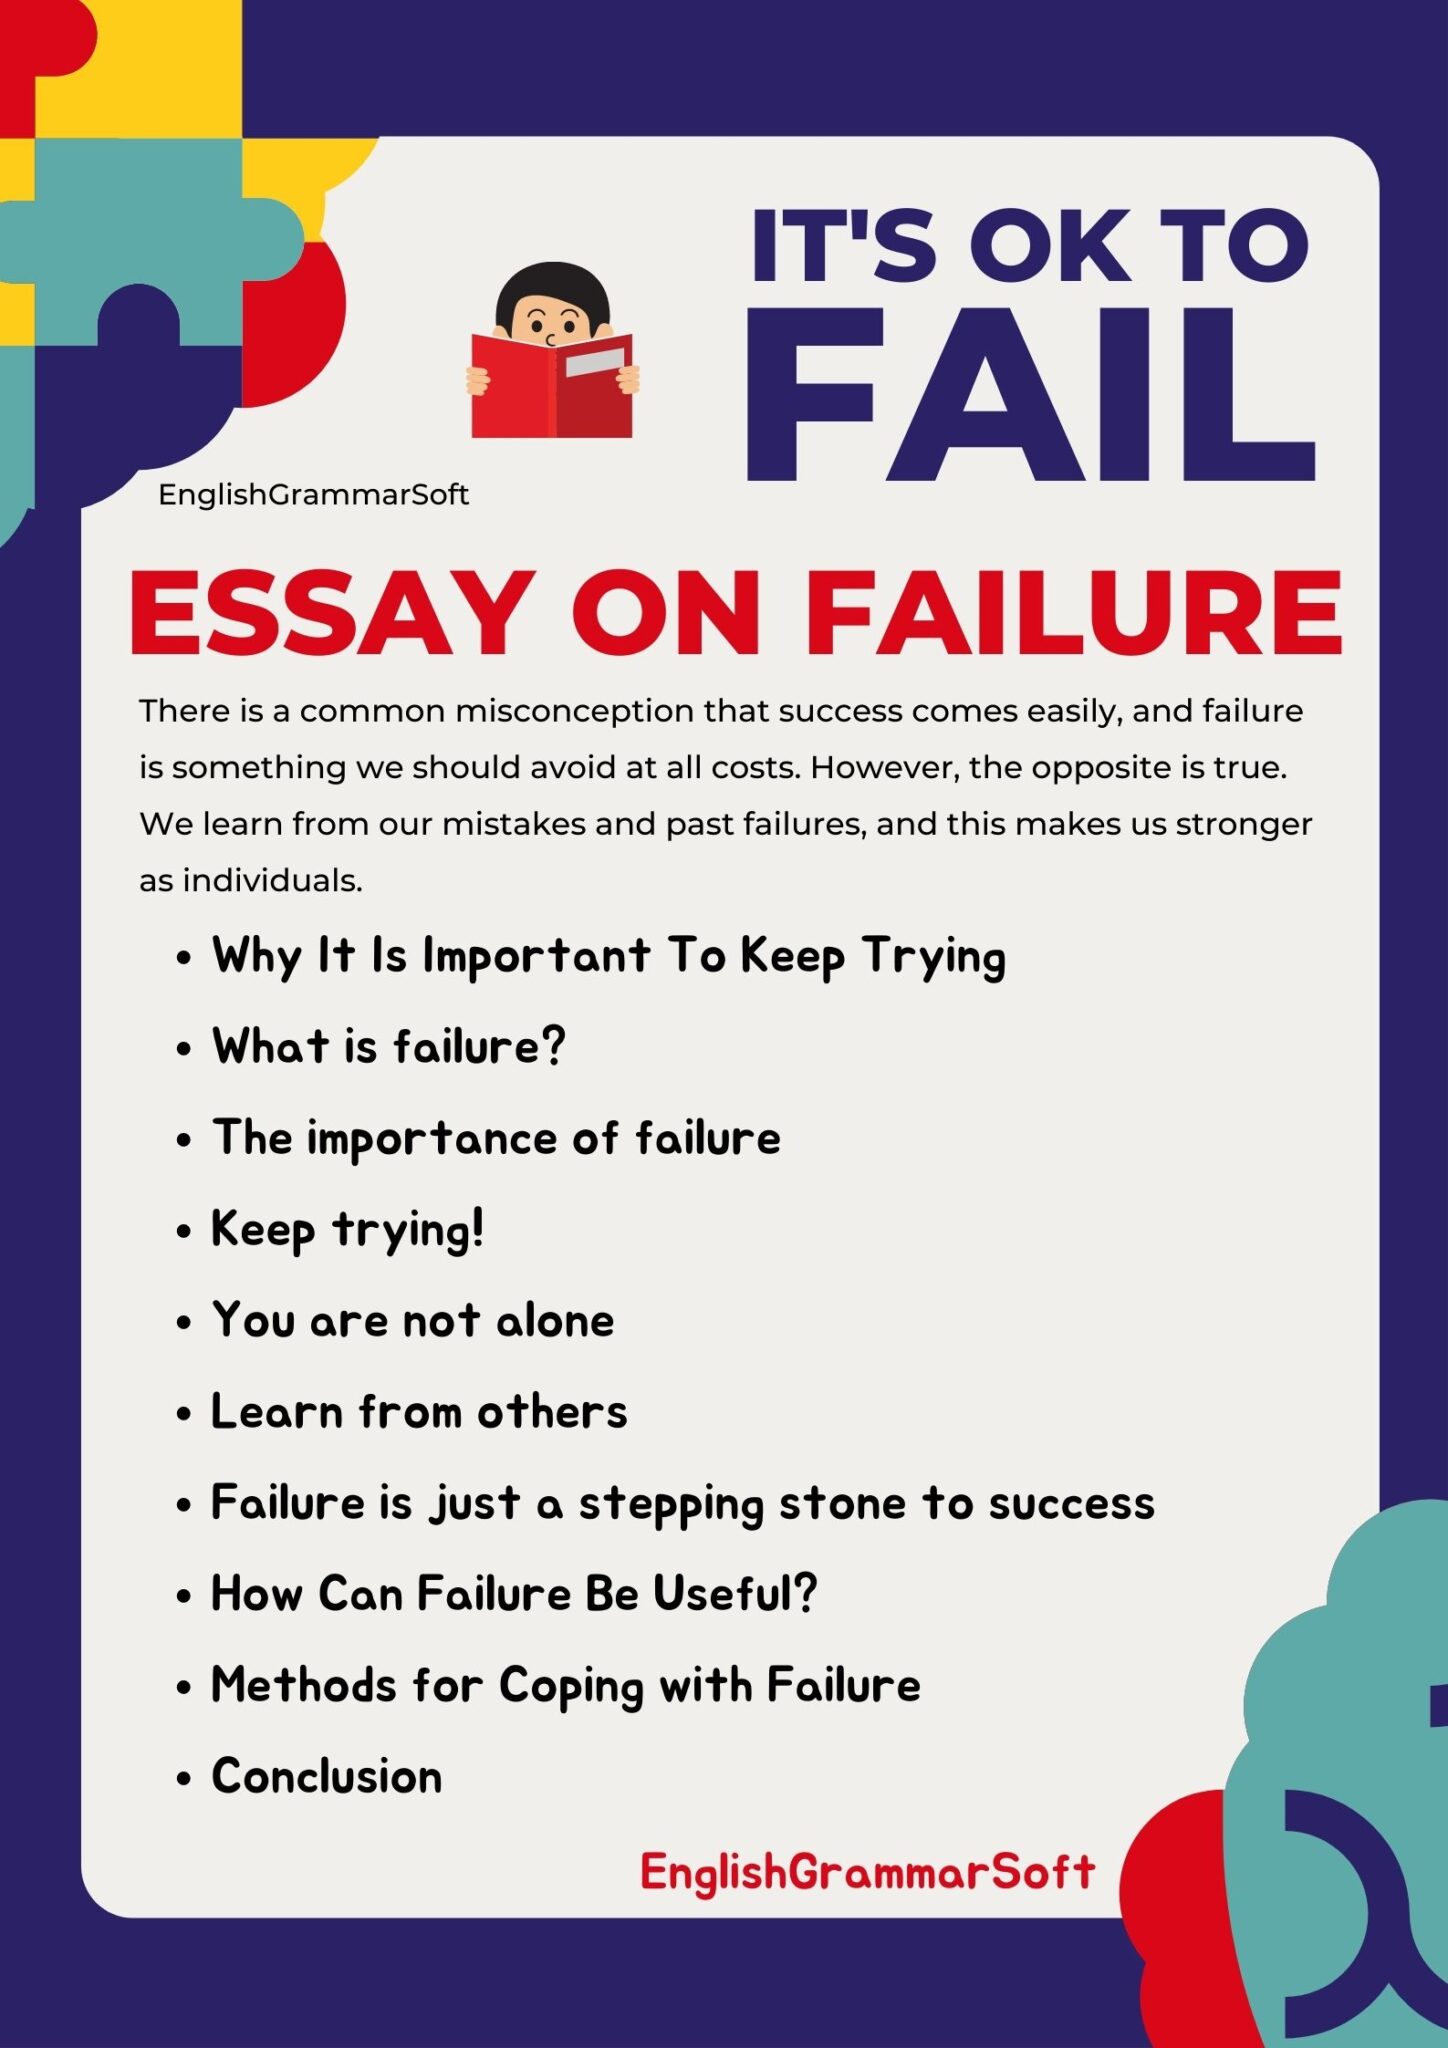 success and failure in life essay